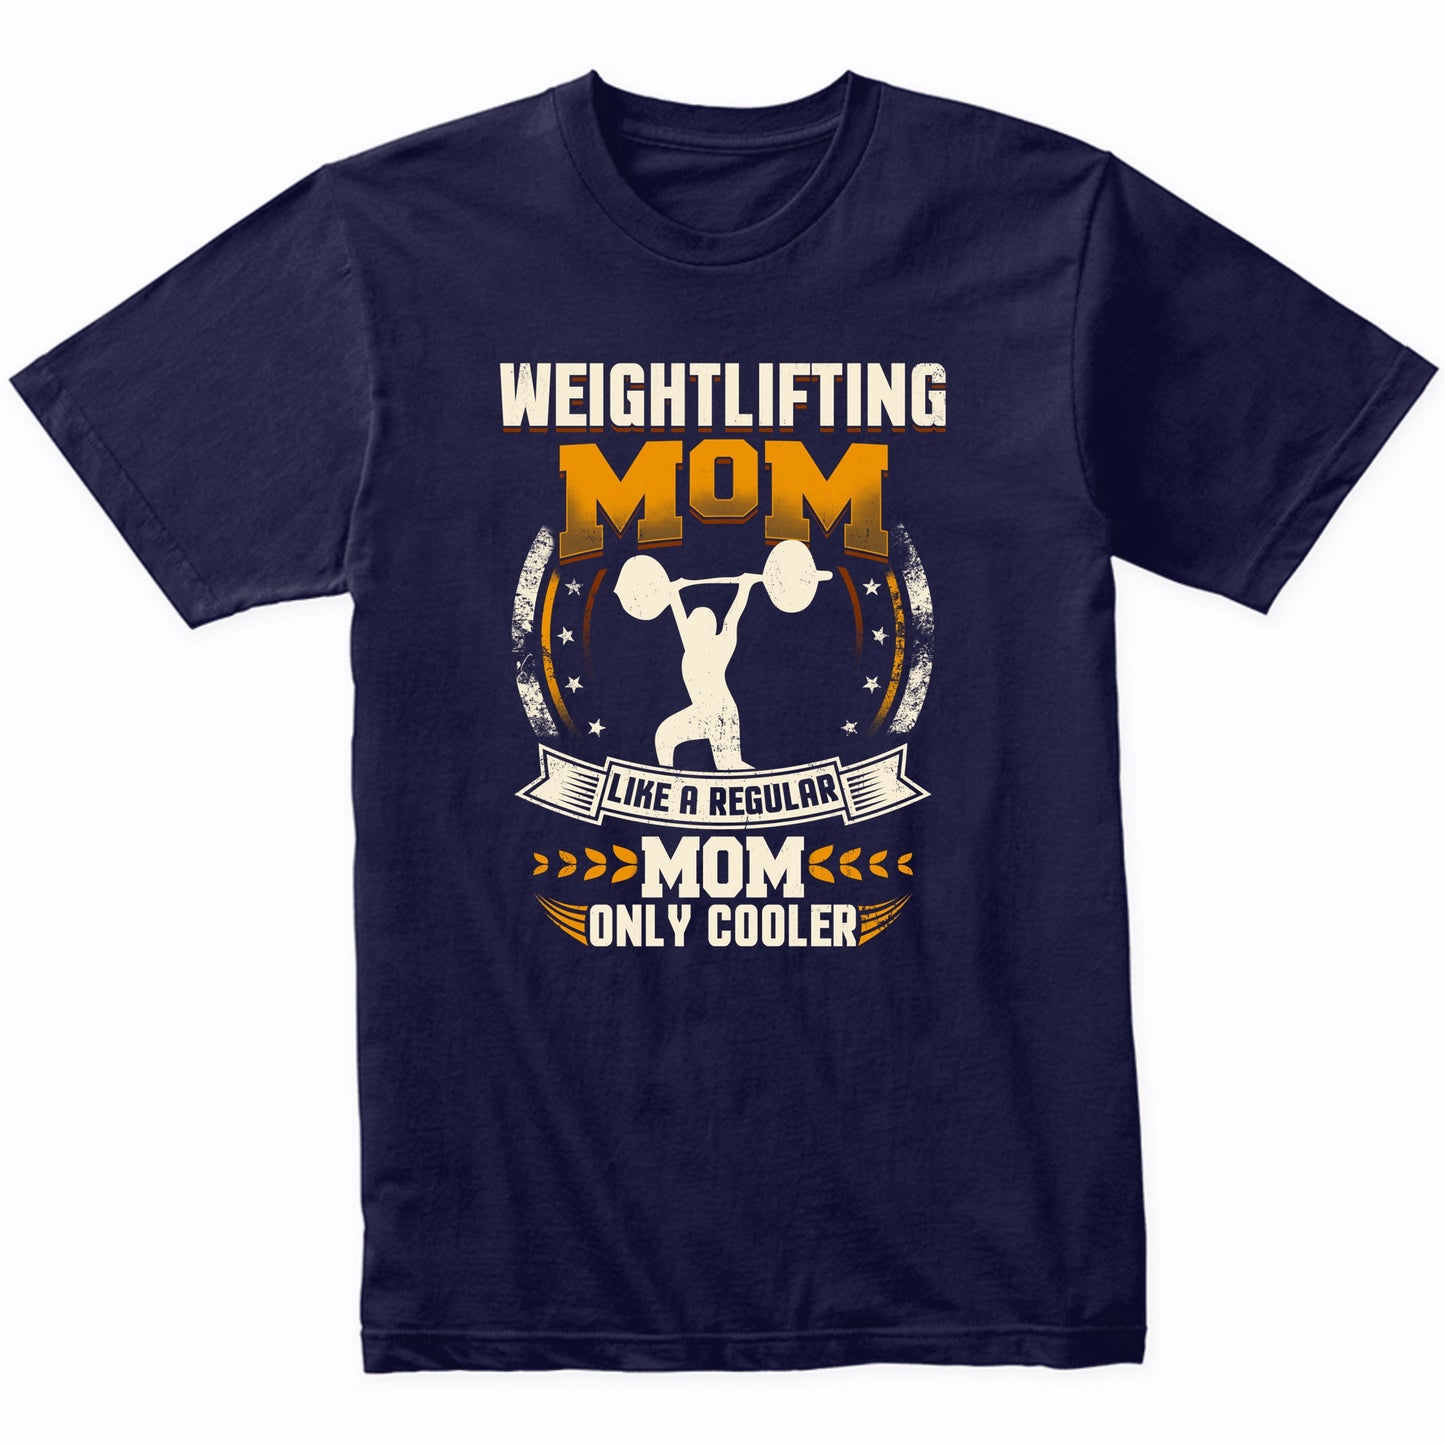 Weightlifting Mom Like A Regular Mom Only Cooler Funny T-Shirt